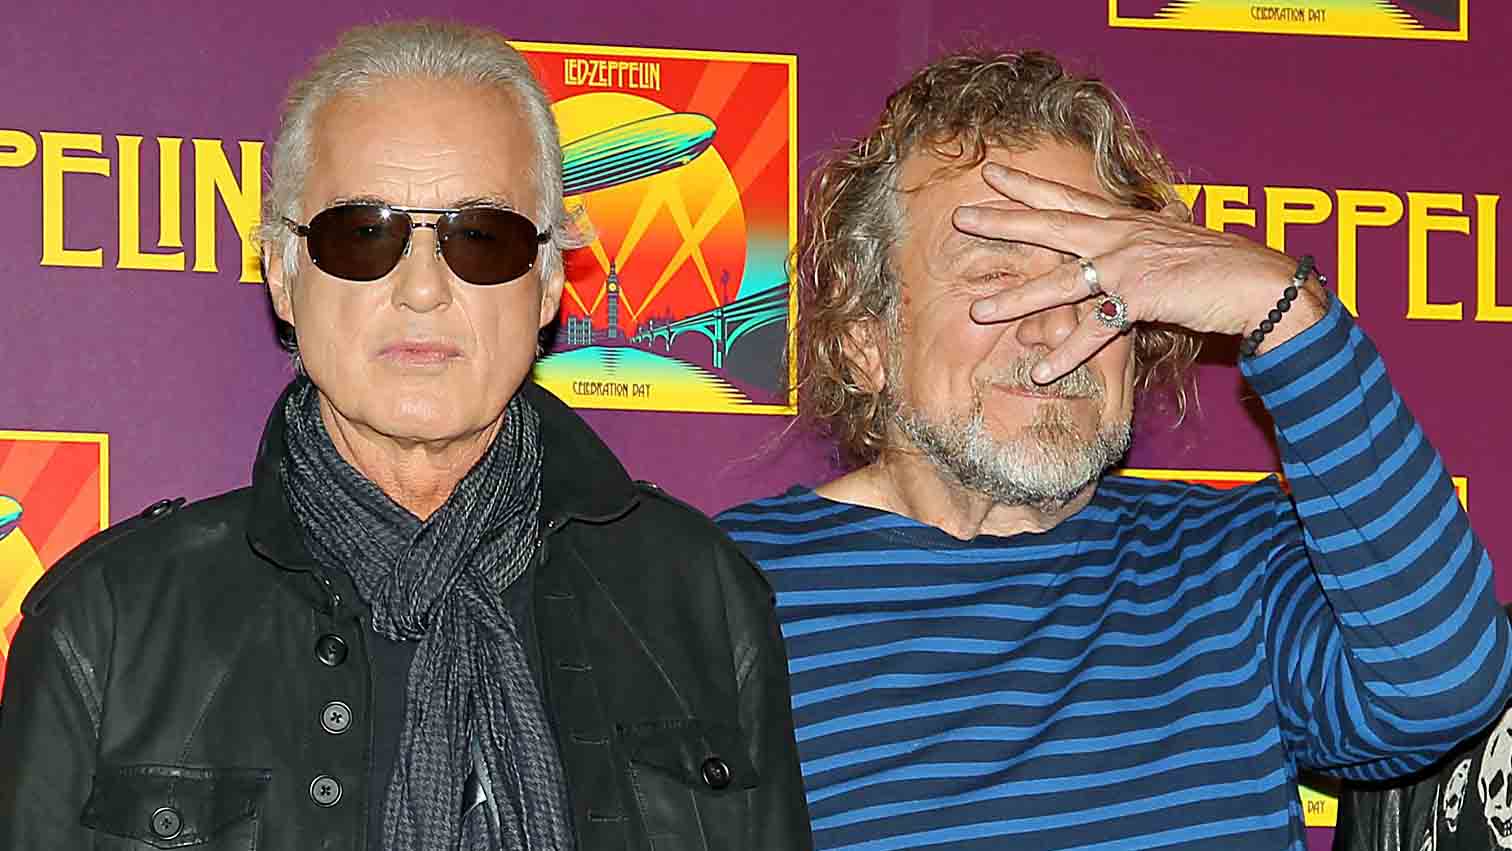 Led Zeppelin Stairway To Heaven trial goes to appeal | MusicRadar